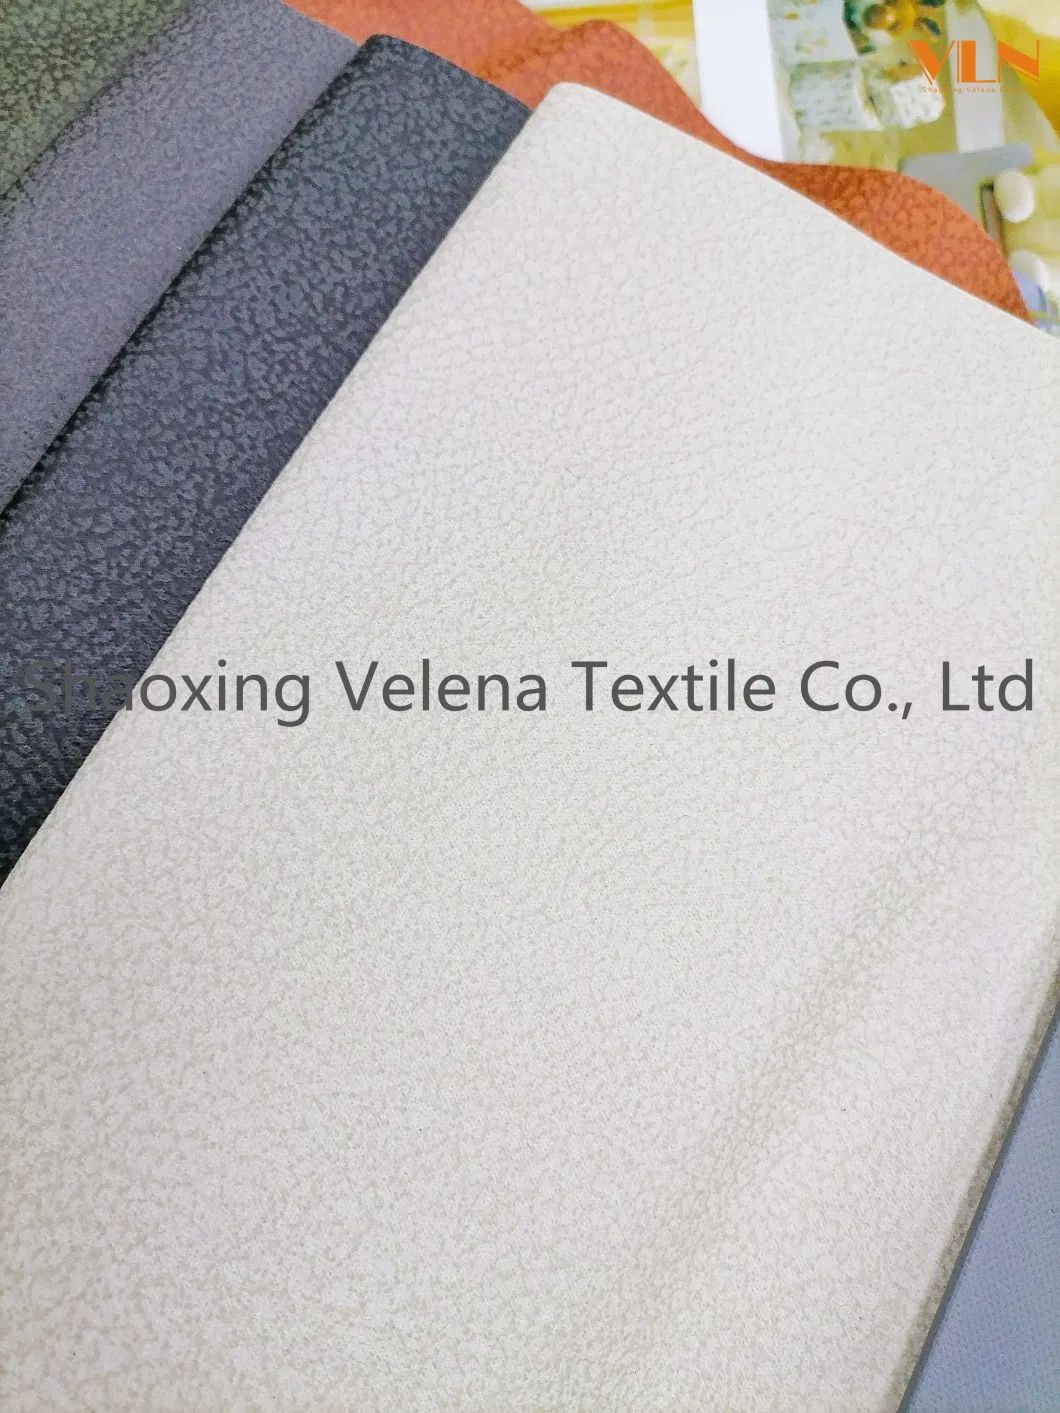 Hot Sale Technology Leather Suede 100% Polyester Fabric Dyeing with Glue Emboss Upholstery Furniture Sofa Textile Fabric